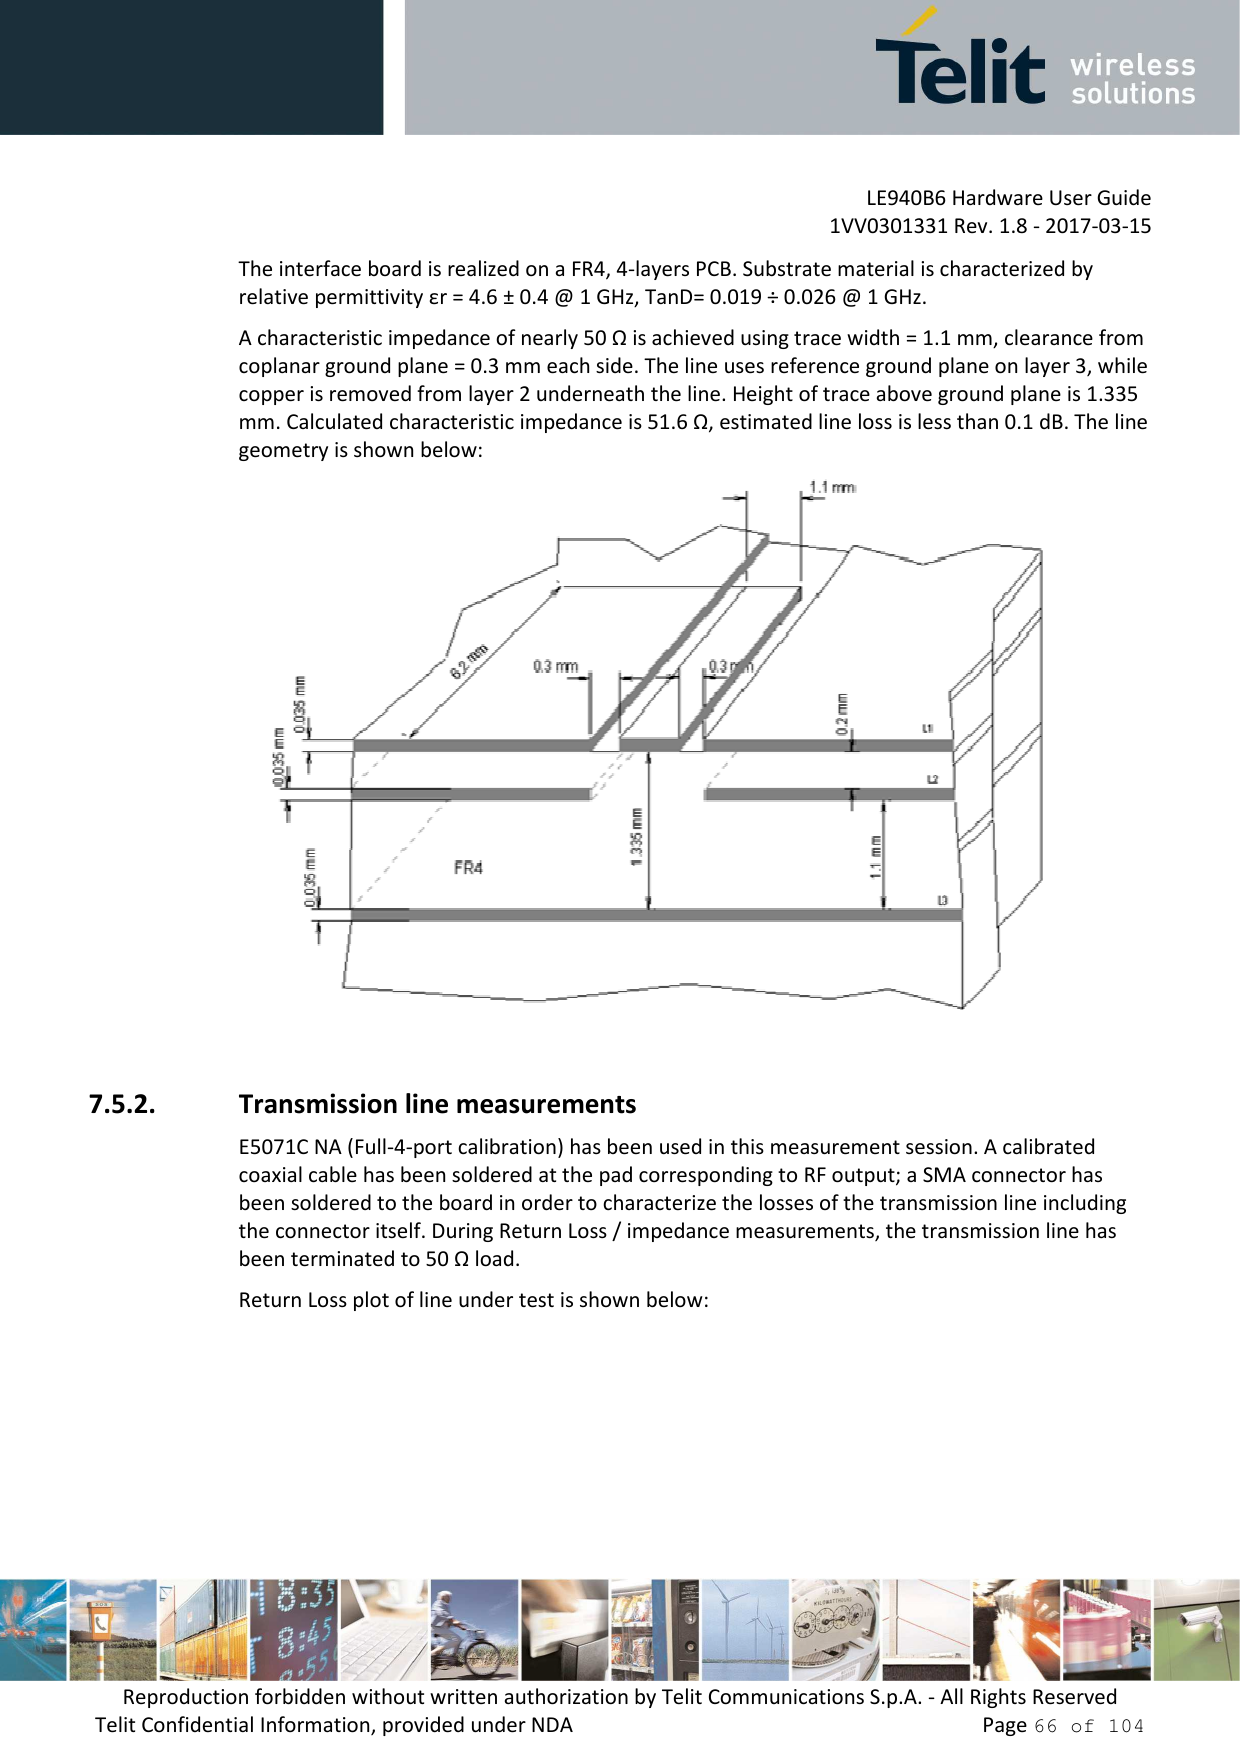         LE940B6 Hardware User Guide     1VV0301331 Rev. 1.8 - 2017-03-15 Reproduction forbidden without written authorization by Telit Communications S.p.A. - All Rights Reserved Telit Confidential Information, provided under NDA                 Page 66 of 104 The interface board is realized on a FR4, 4-layers PCB. Substrate material is characterized by relative permittivity εr = 4.6 ± 0.4 @ 1 GHz, TanD= 0.019 ÷ 0.026 @ 1 GHz. A characteristic impedance of nearly 50 Ω is achieved using trace width = 1.1 mm, clearance from coplanar ground plane = 0.3 mm each side. The line uses reference ground plane on layer 3, while copper is removed from layer 2 underneath the line. Height of trace above ground plane is 1.335 mm. Calculated characteristic impedance is 51.6 Ω, estimated line loss is less than 0.1 dB. The line geometry is shown below:   7.5.2. Transmission line measurements E5071C NA (Full-4-port calibration) has been used in this measurement session. A calibrated coaxial cable has been soldered at the pad corresponding to RF output; a SMA connector has been soldered to the board in order to characterize the losses of the transmission line including the connector itself. During Return Loss / impedance measurements, the transmission line has been terminated to 50 Ω load. Return Loss plot of line under test is shown below: 